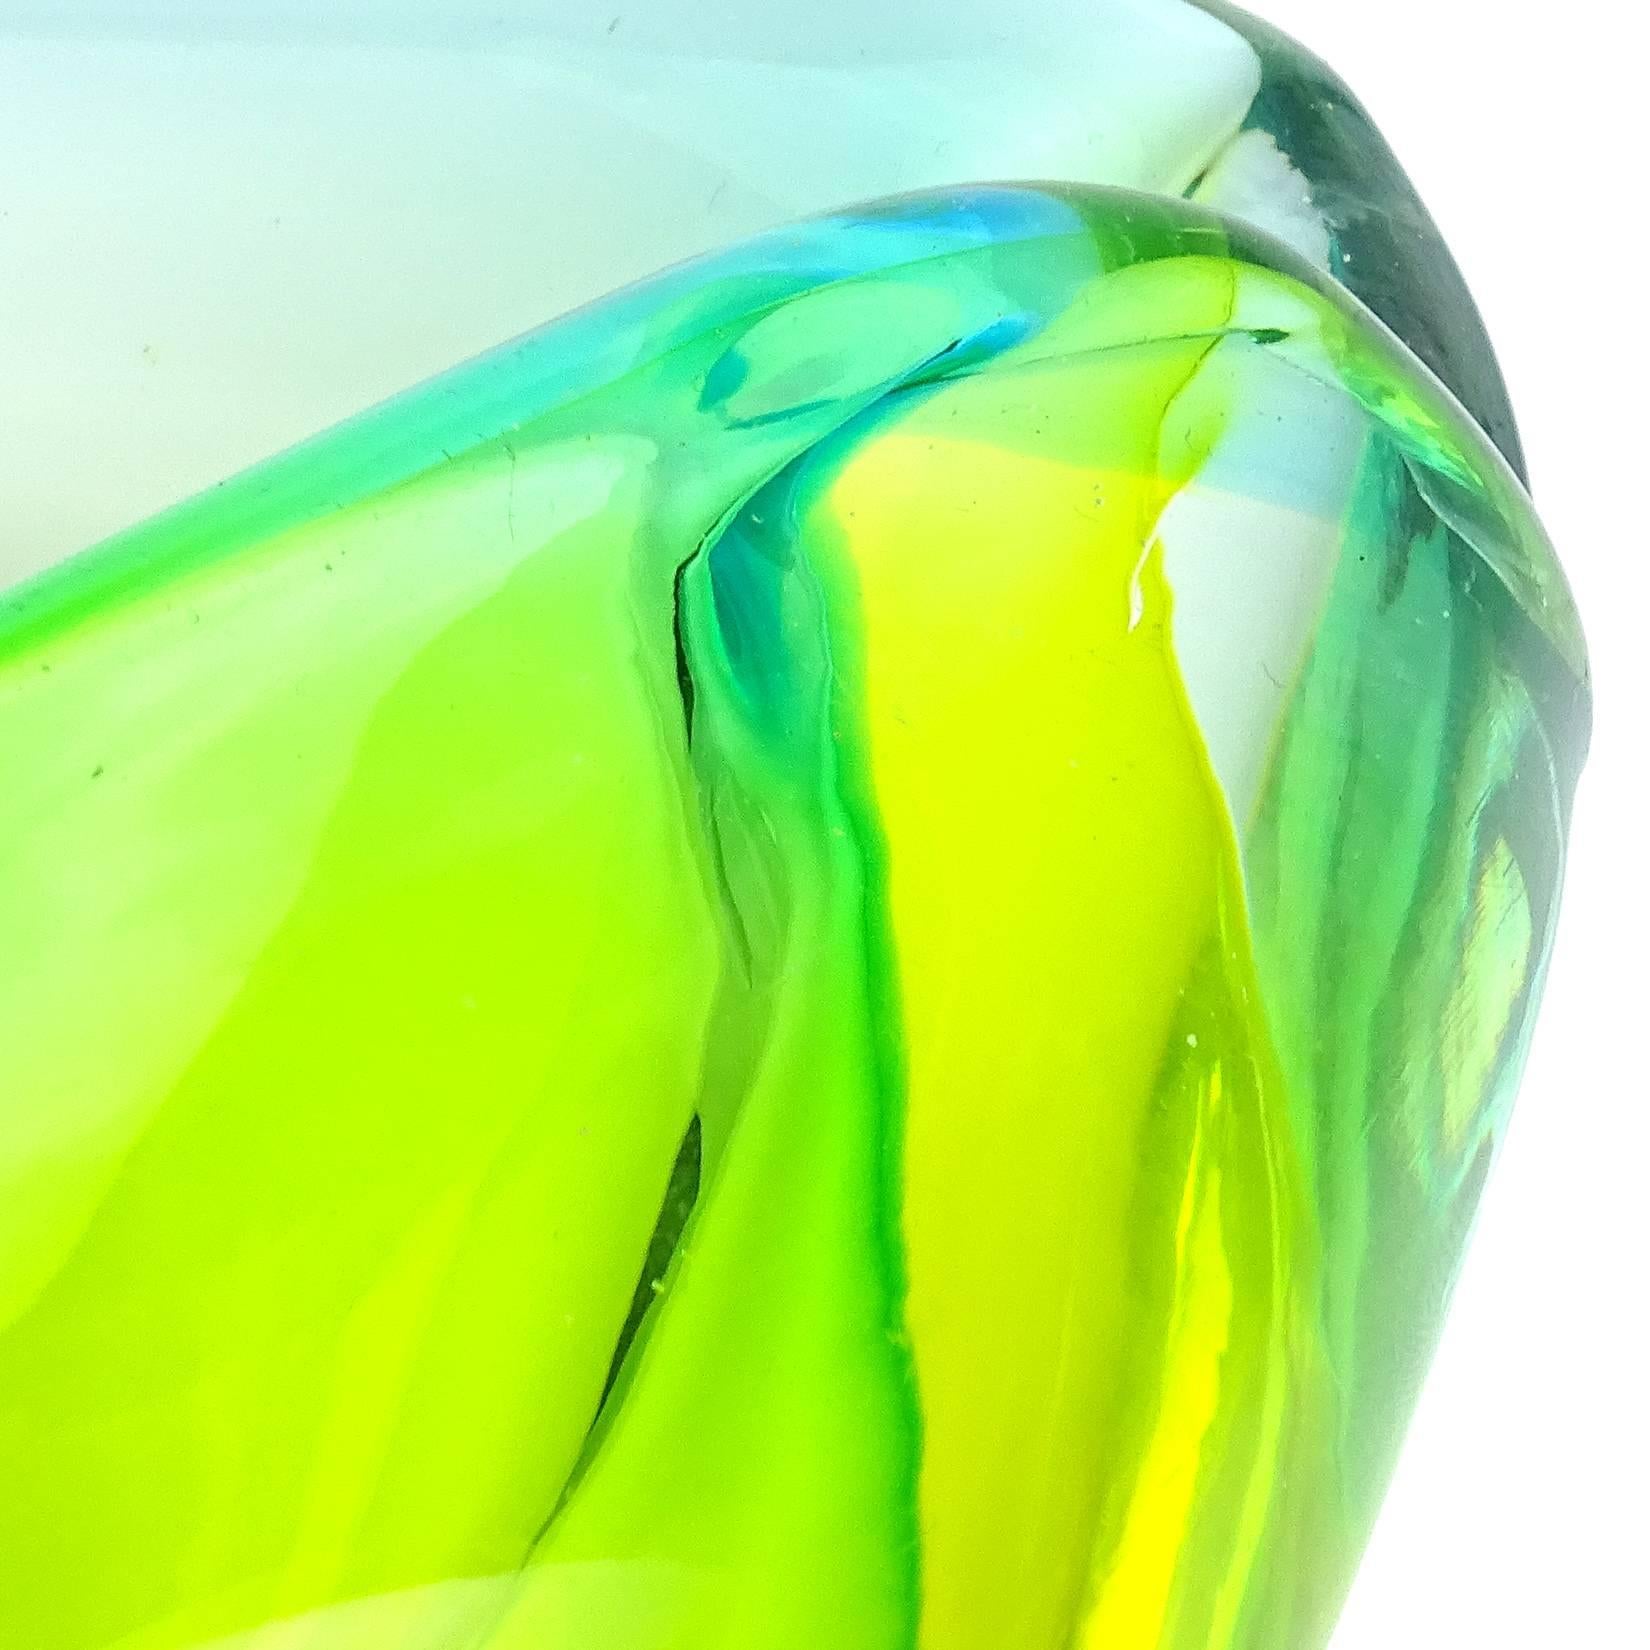 Hand-Crafted Cenedese Murano Sommerso Yellow Green Italian Art Glass Conch Seashell Bowl